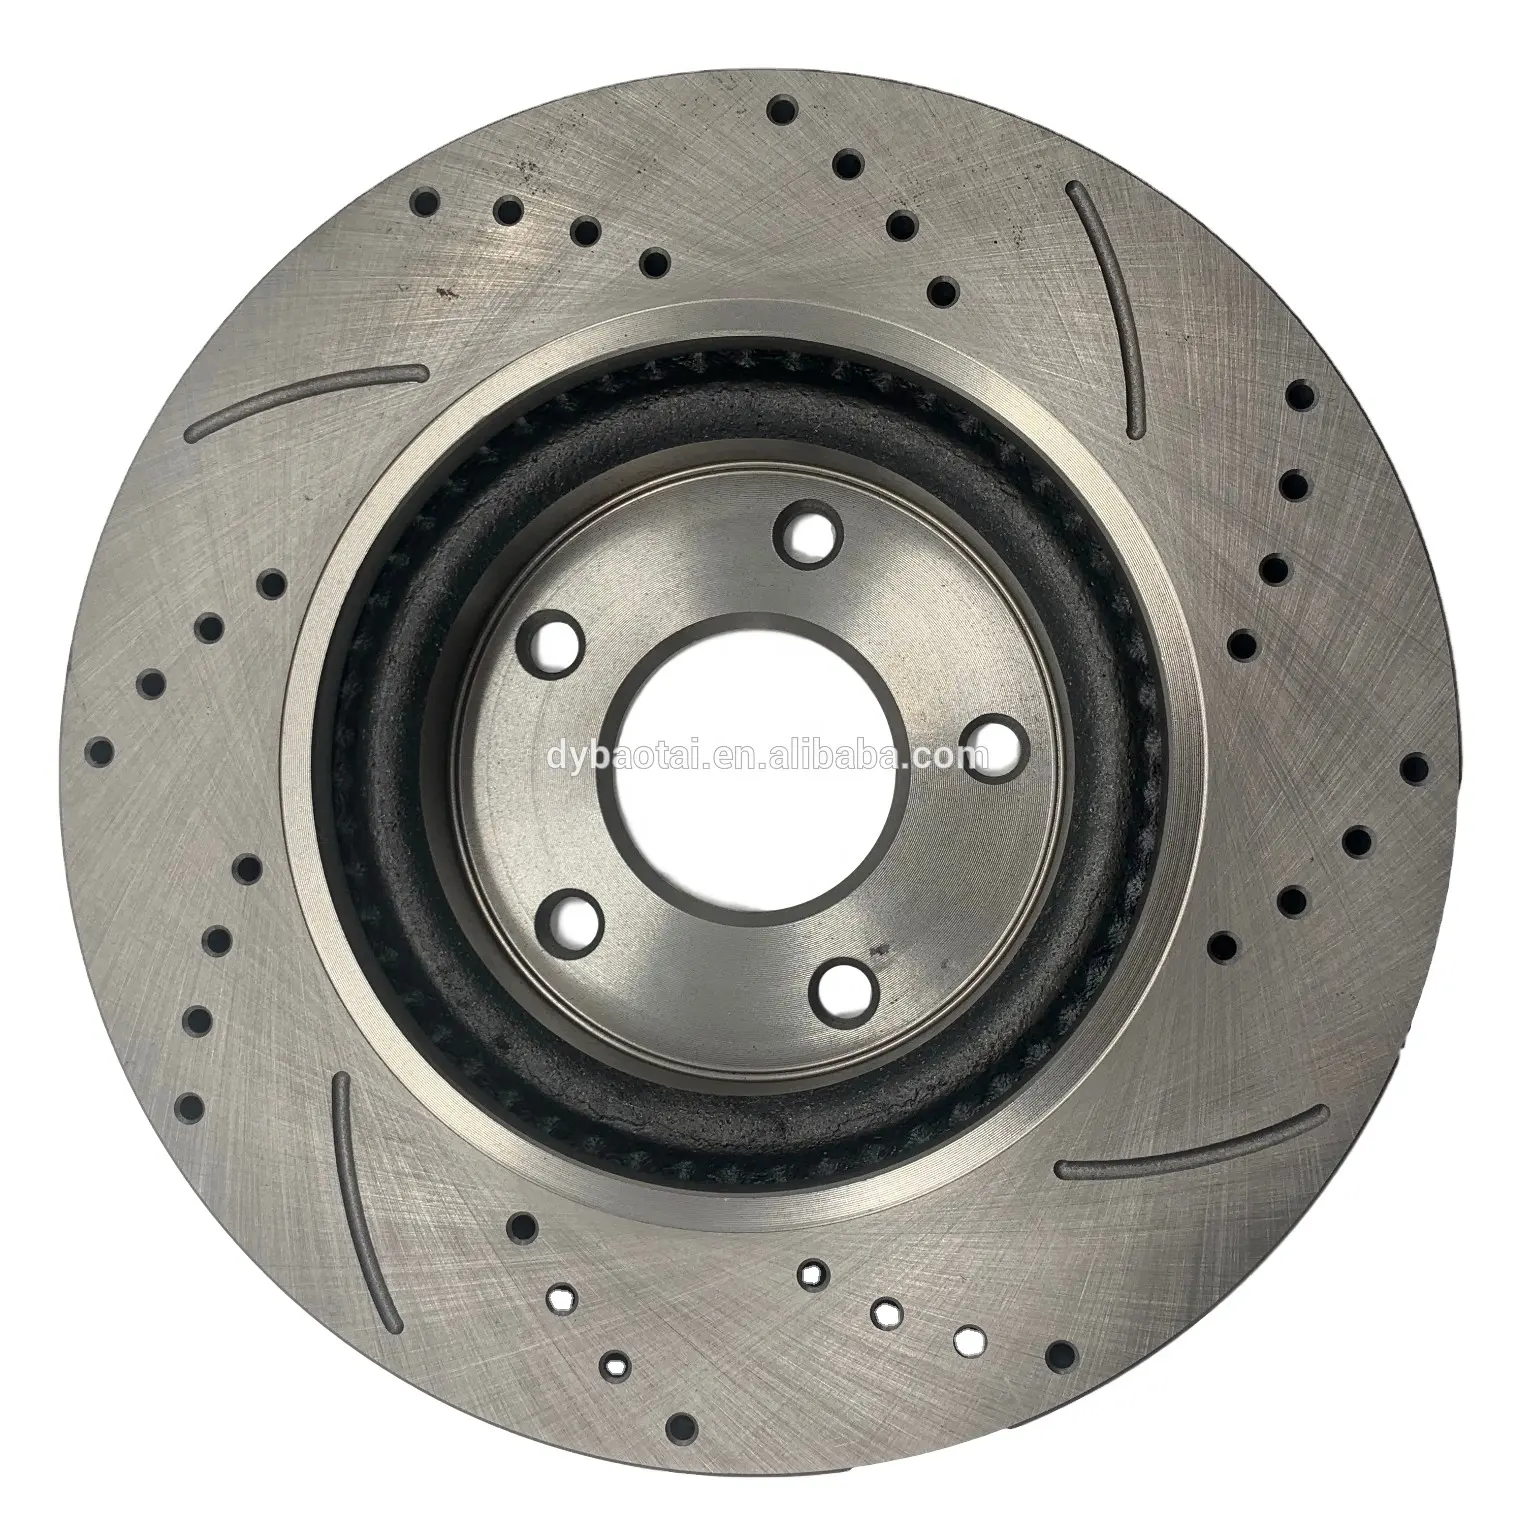 CHINE VOITURE ROTORS <span class=keywords><strong>DE</strong></span> <span class=keywords><strong>FREIN</strong></span> DISQUES FABRICANT 8-97308-868-0